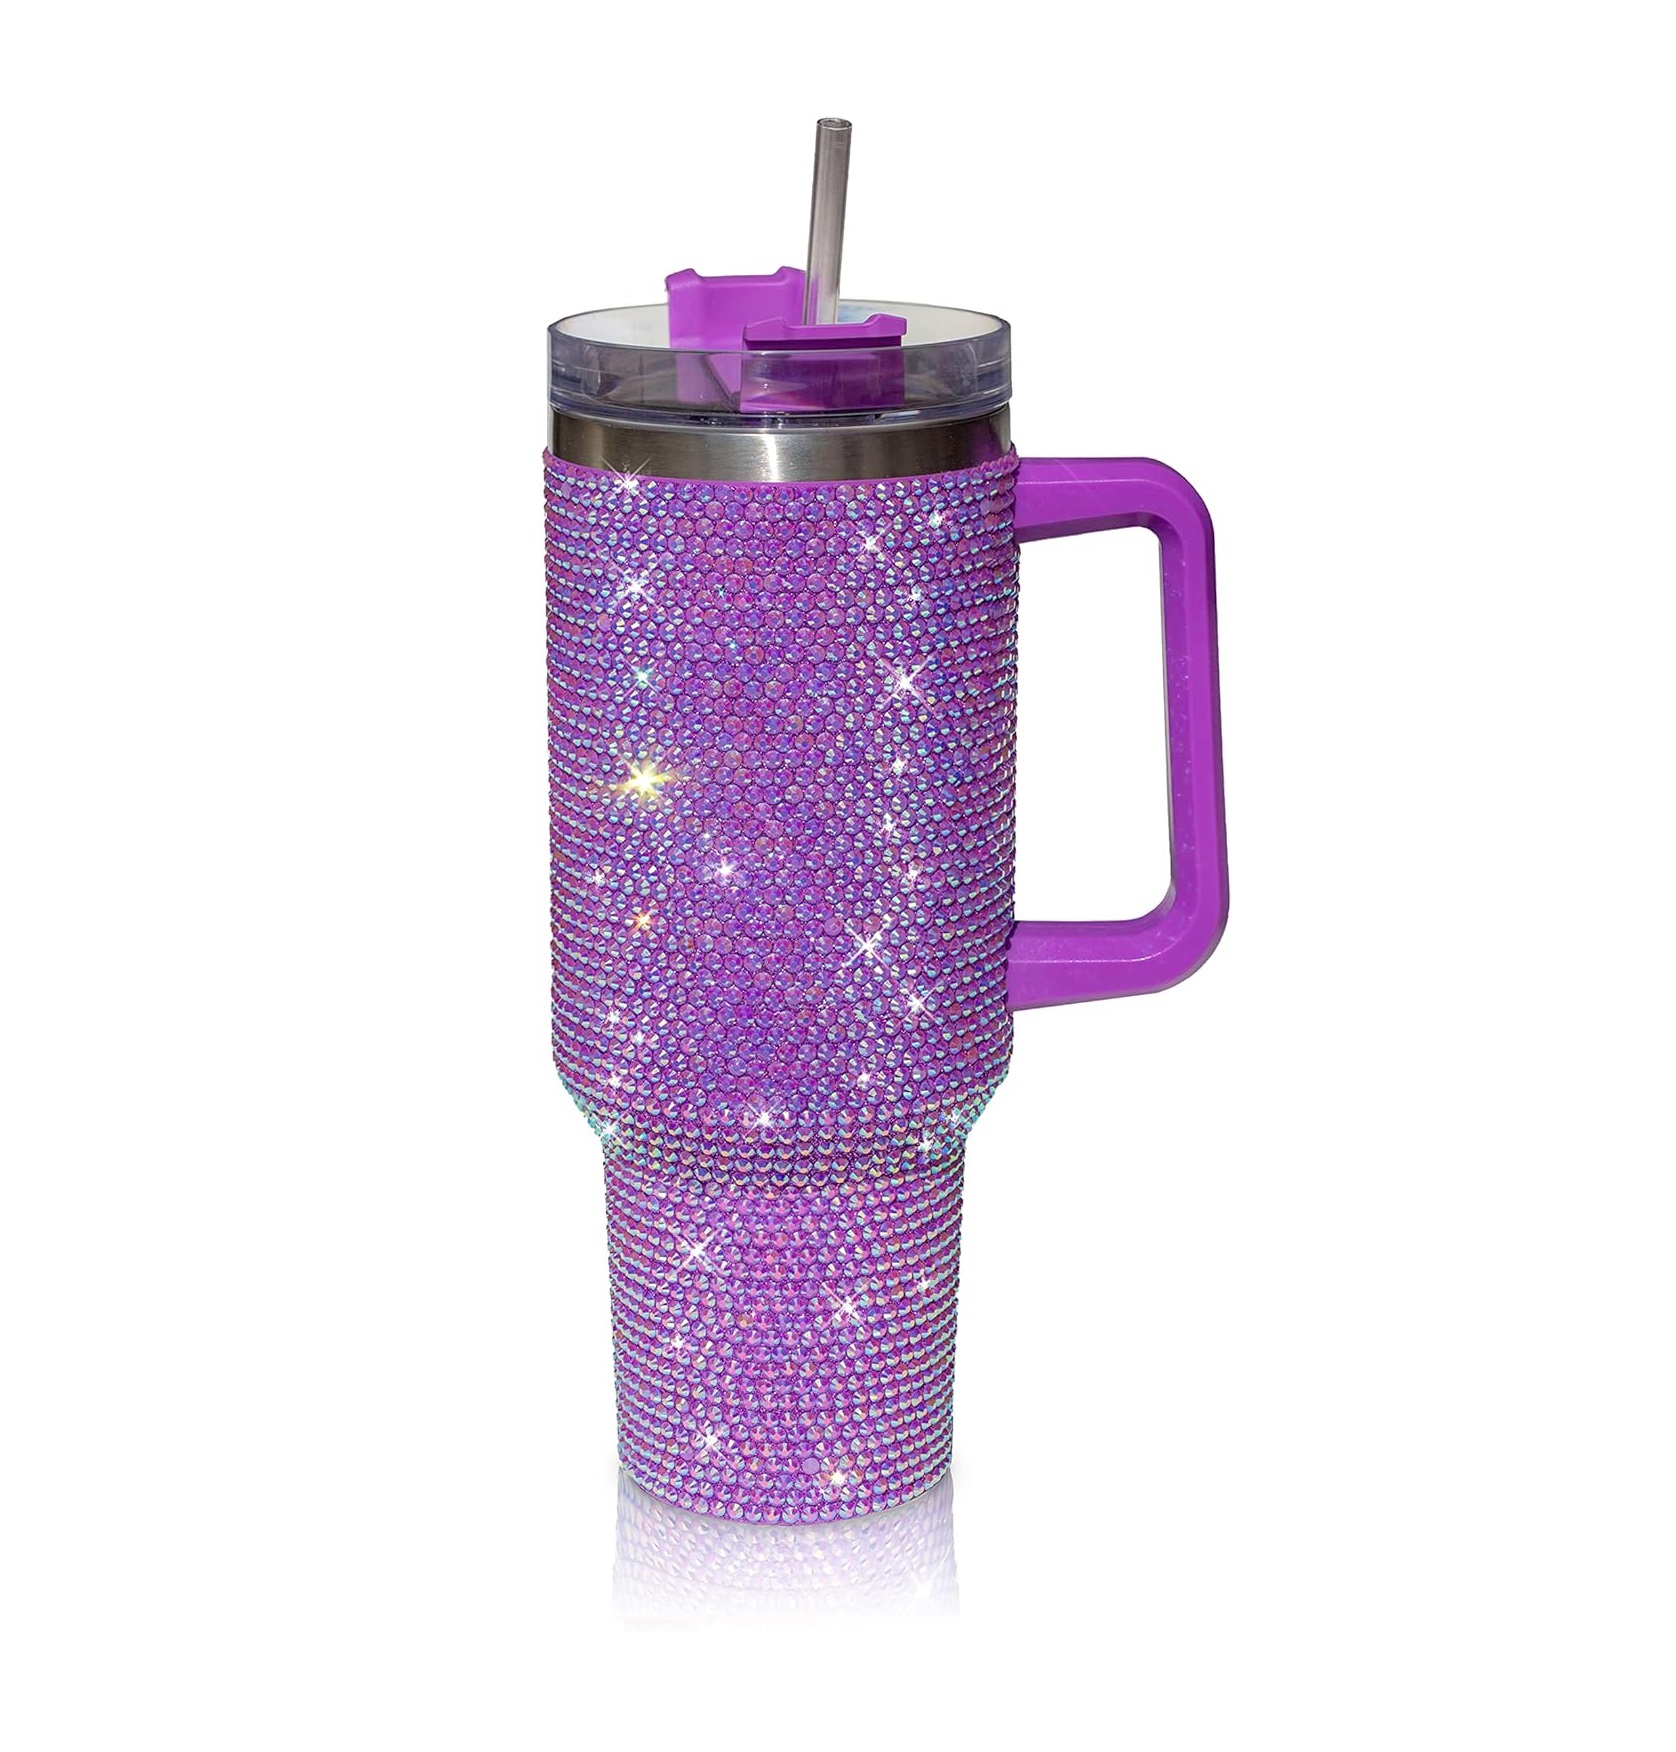 Studded Travel Mug 1200ml With Lid and Straw Insulated Stainless Steel